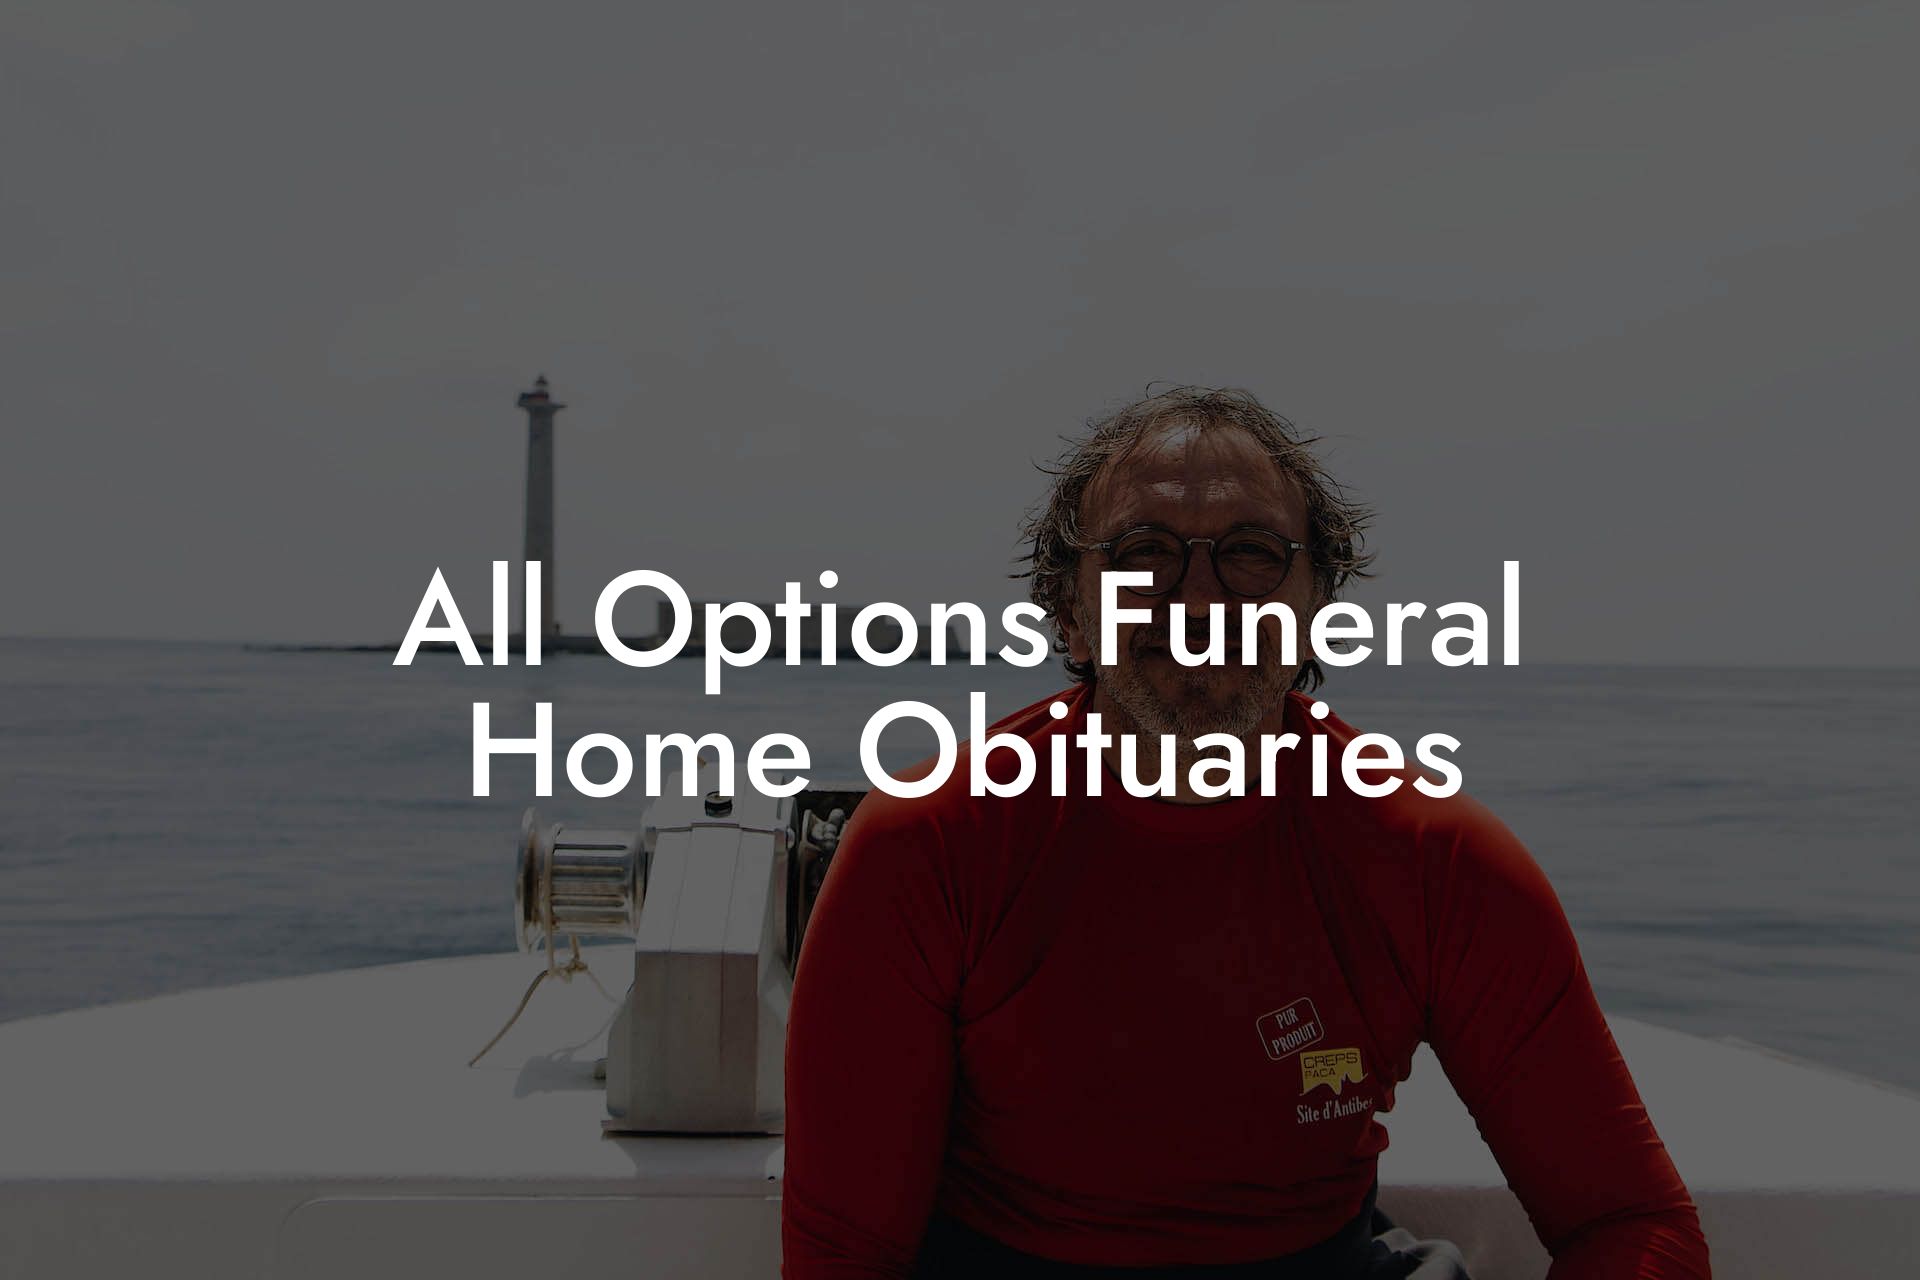 All Options Funeral Home Obituaries